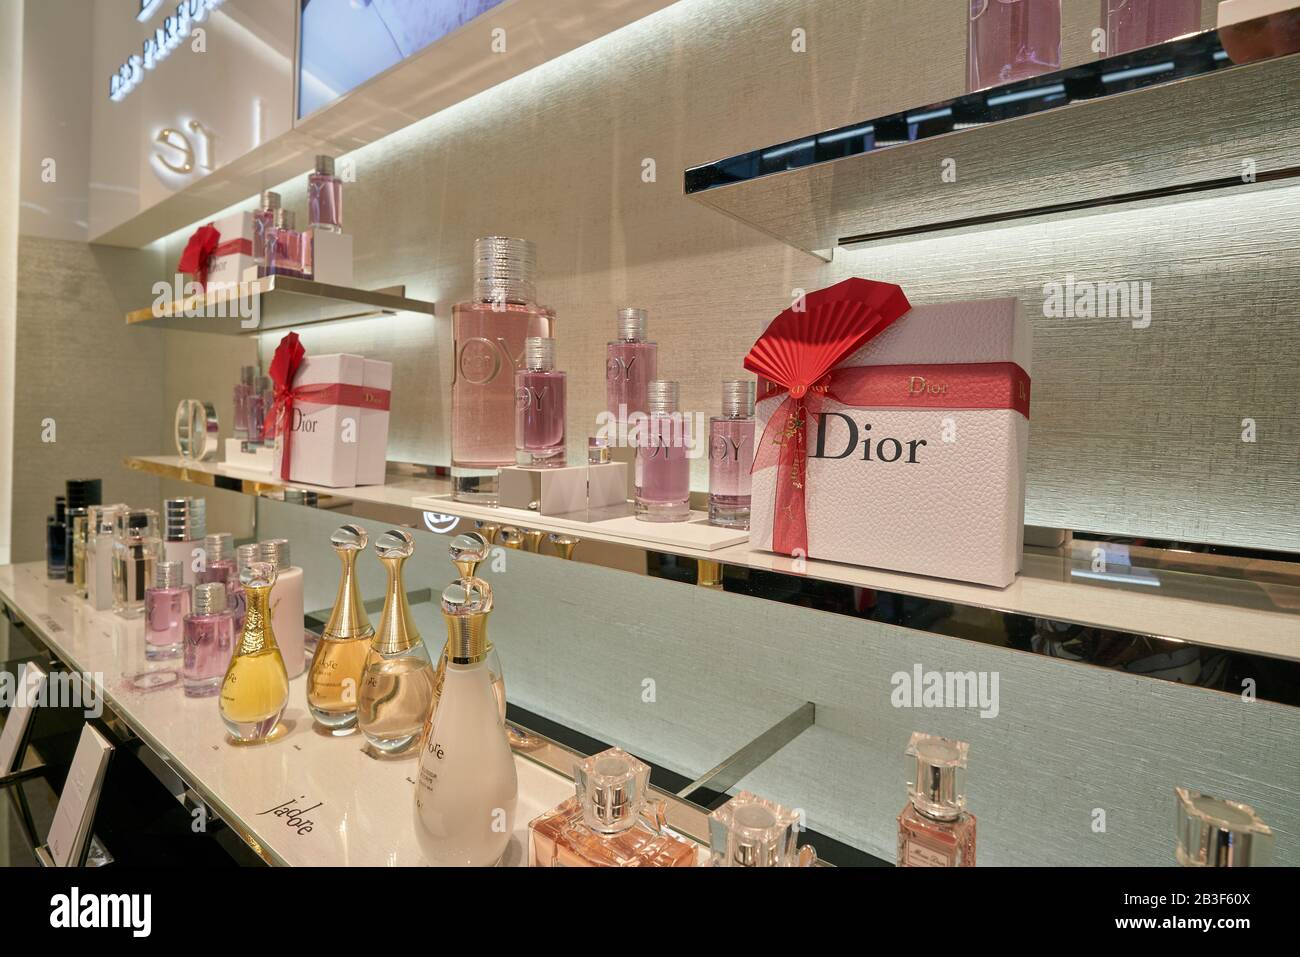 ✨Miniature perfume collection （YSL DIOR LV）, Gallery posted by It's me JY